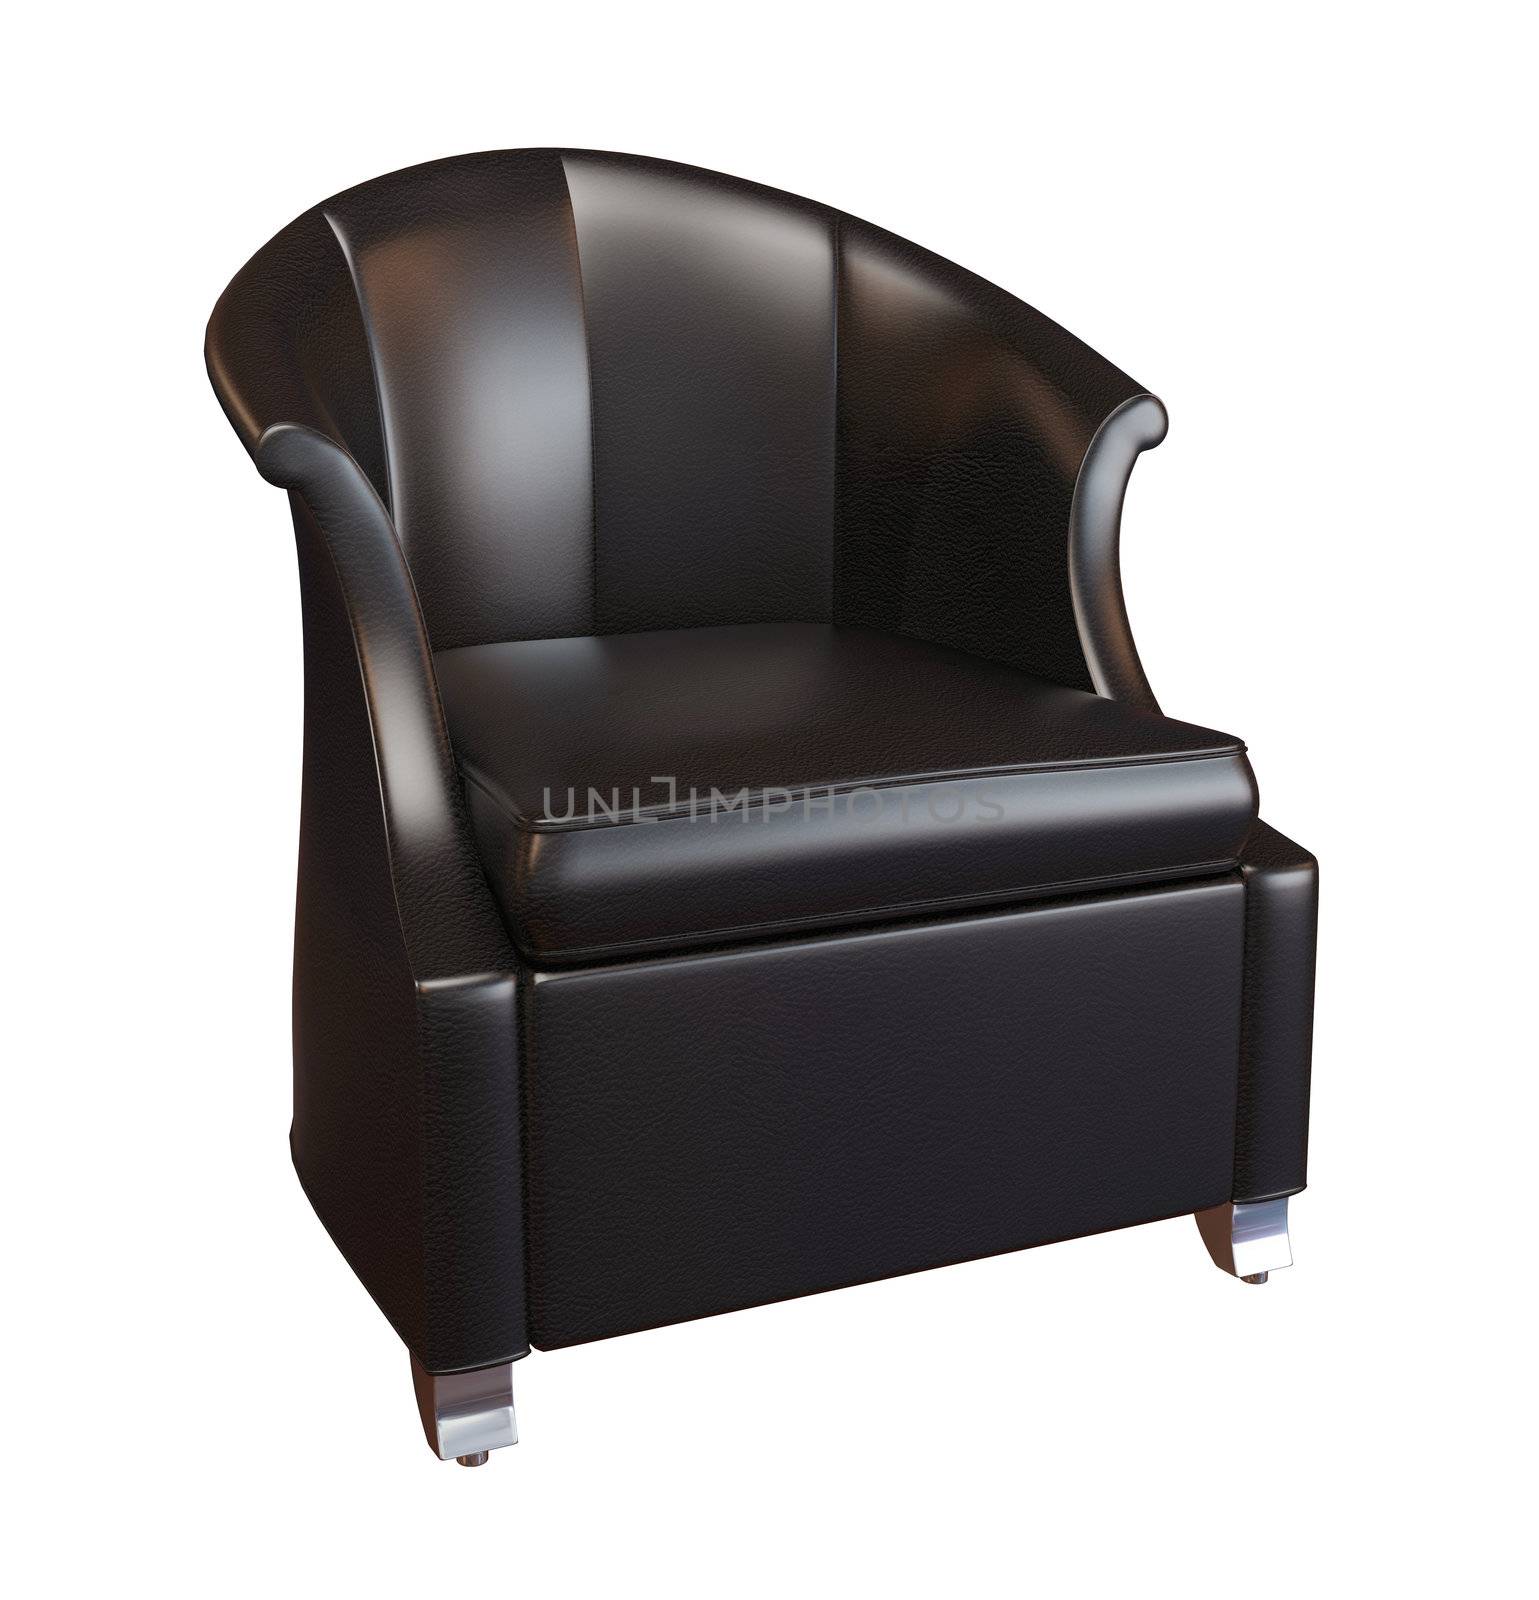 Comfy black leather armchair by Morphart